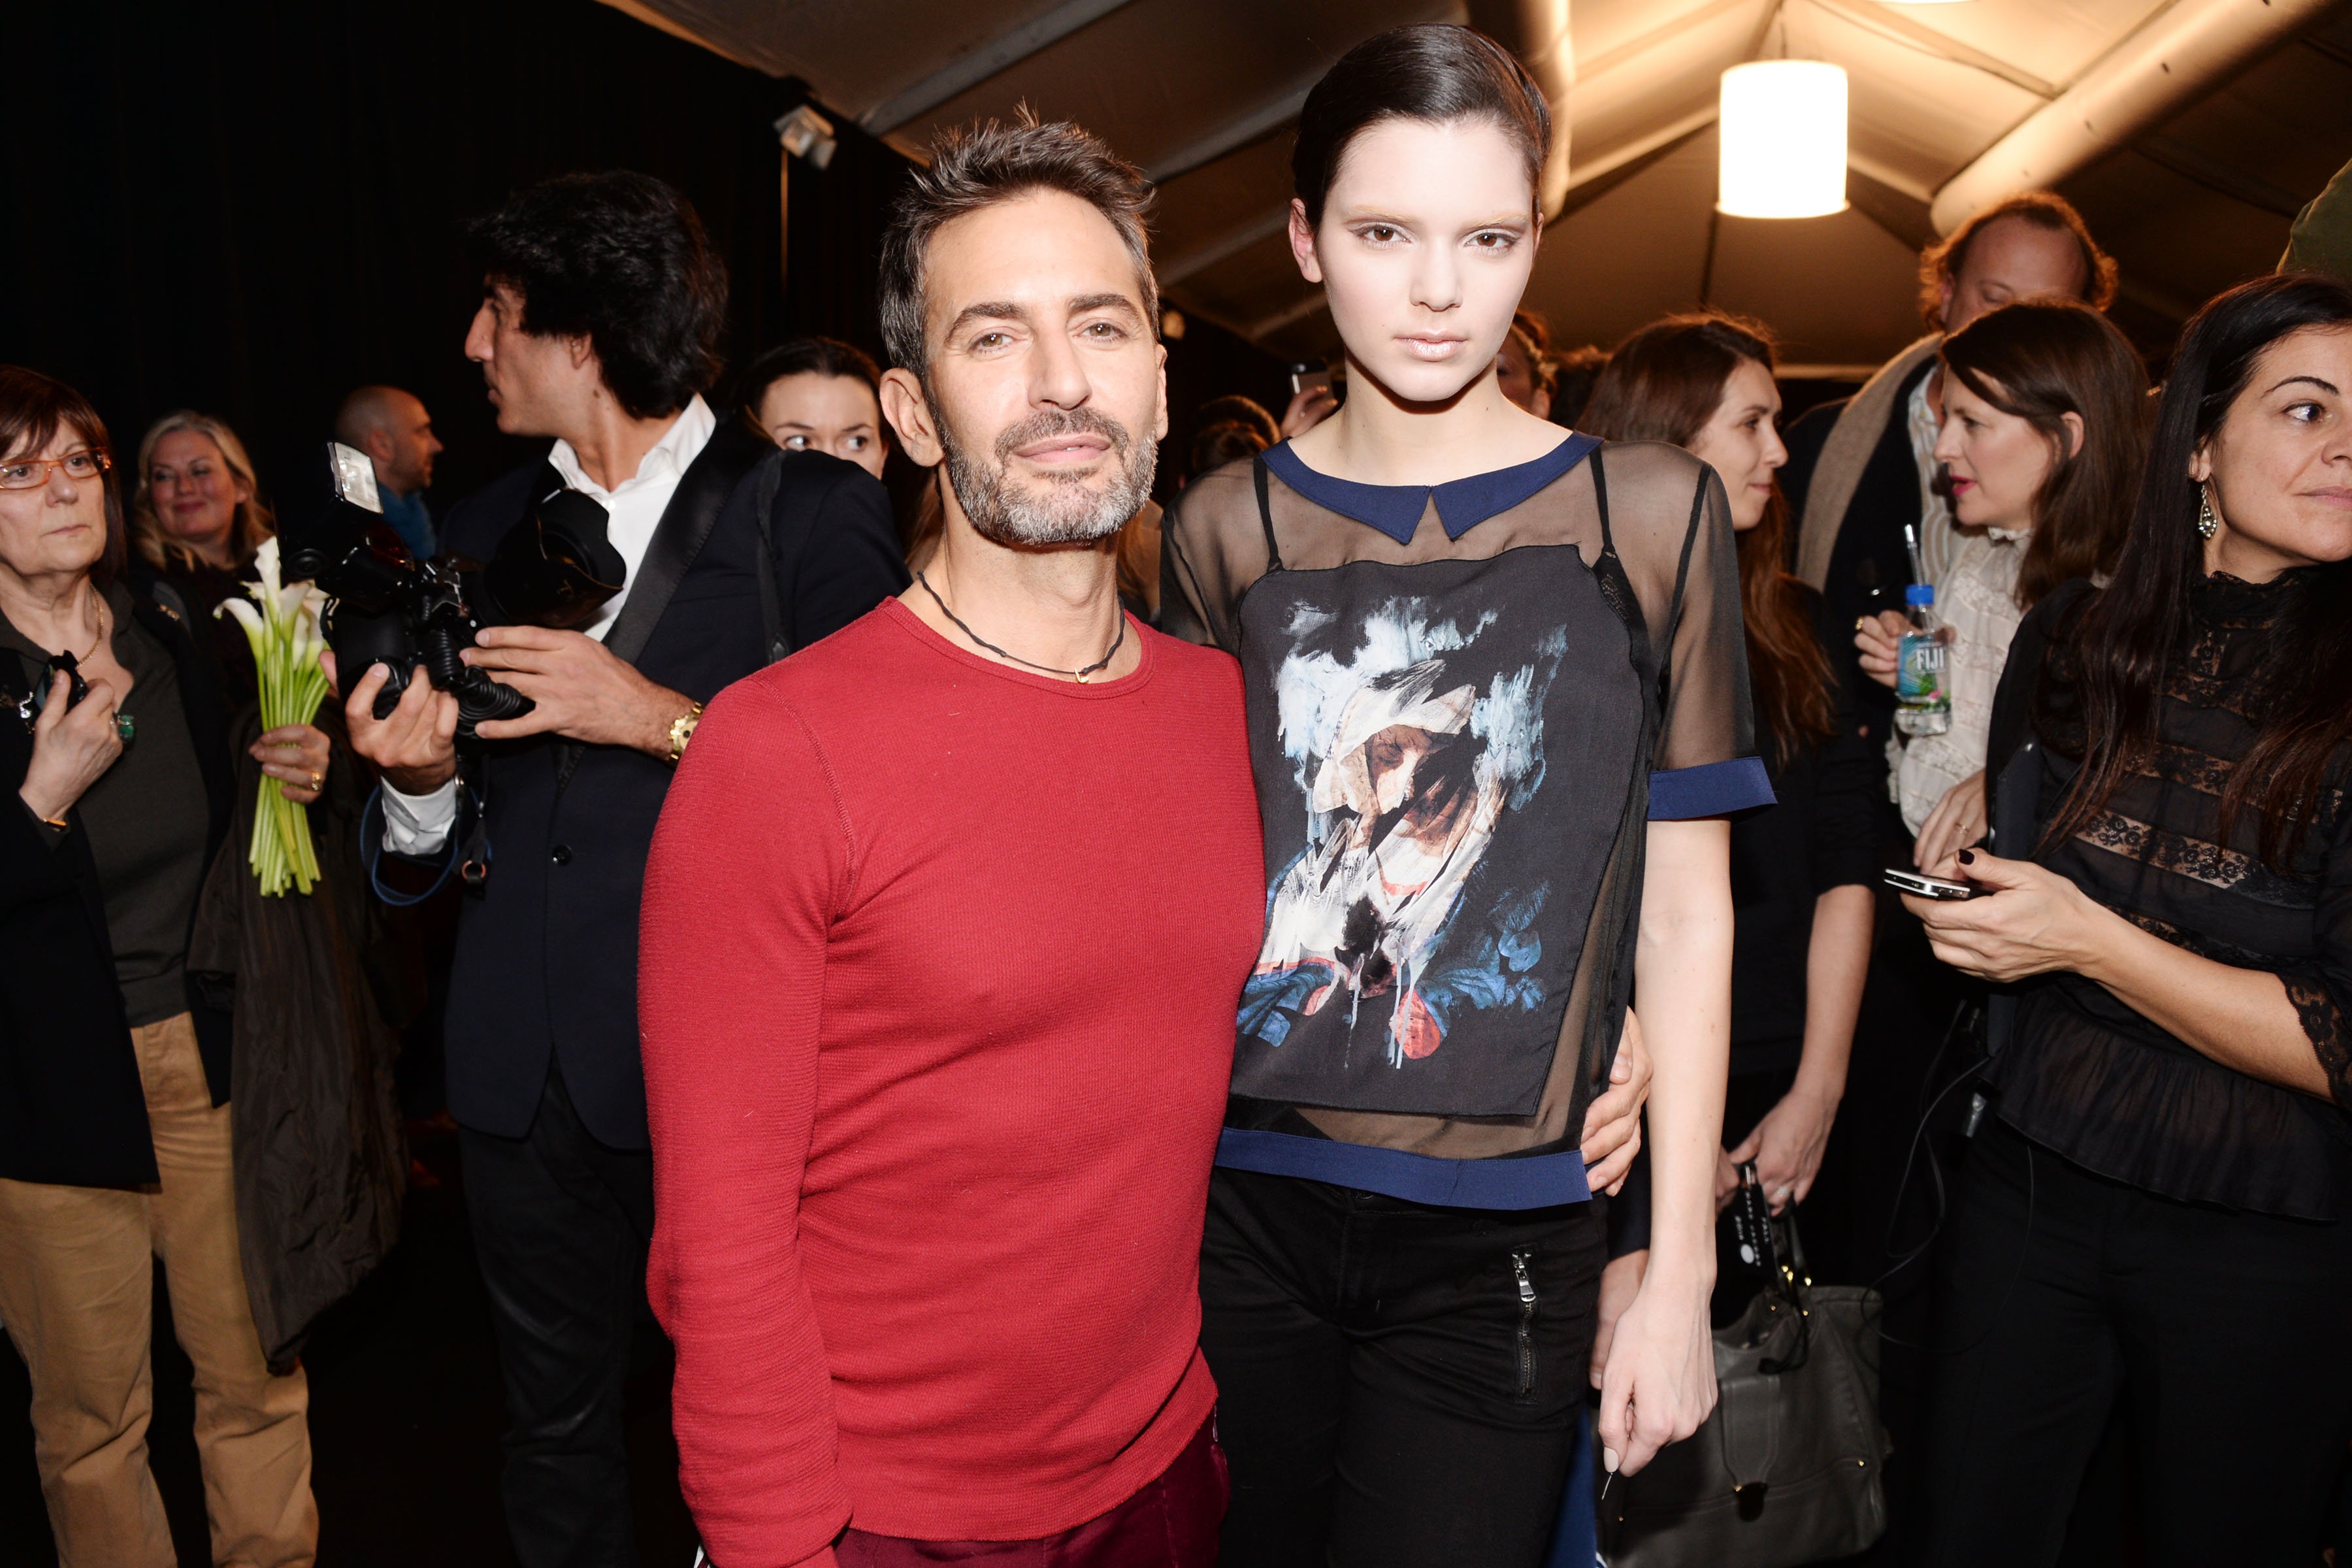 Marc Jacobs and an almost unrecognizable Kendall Jenner embrace after his runway show where she wore that top. ©Patrick McMullan Clint Spaulding/PatrickMcMullan.com